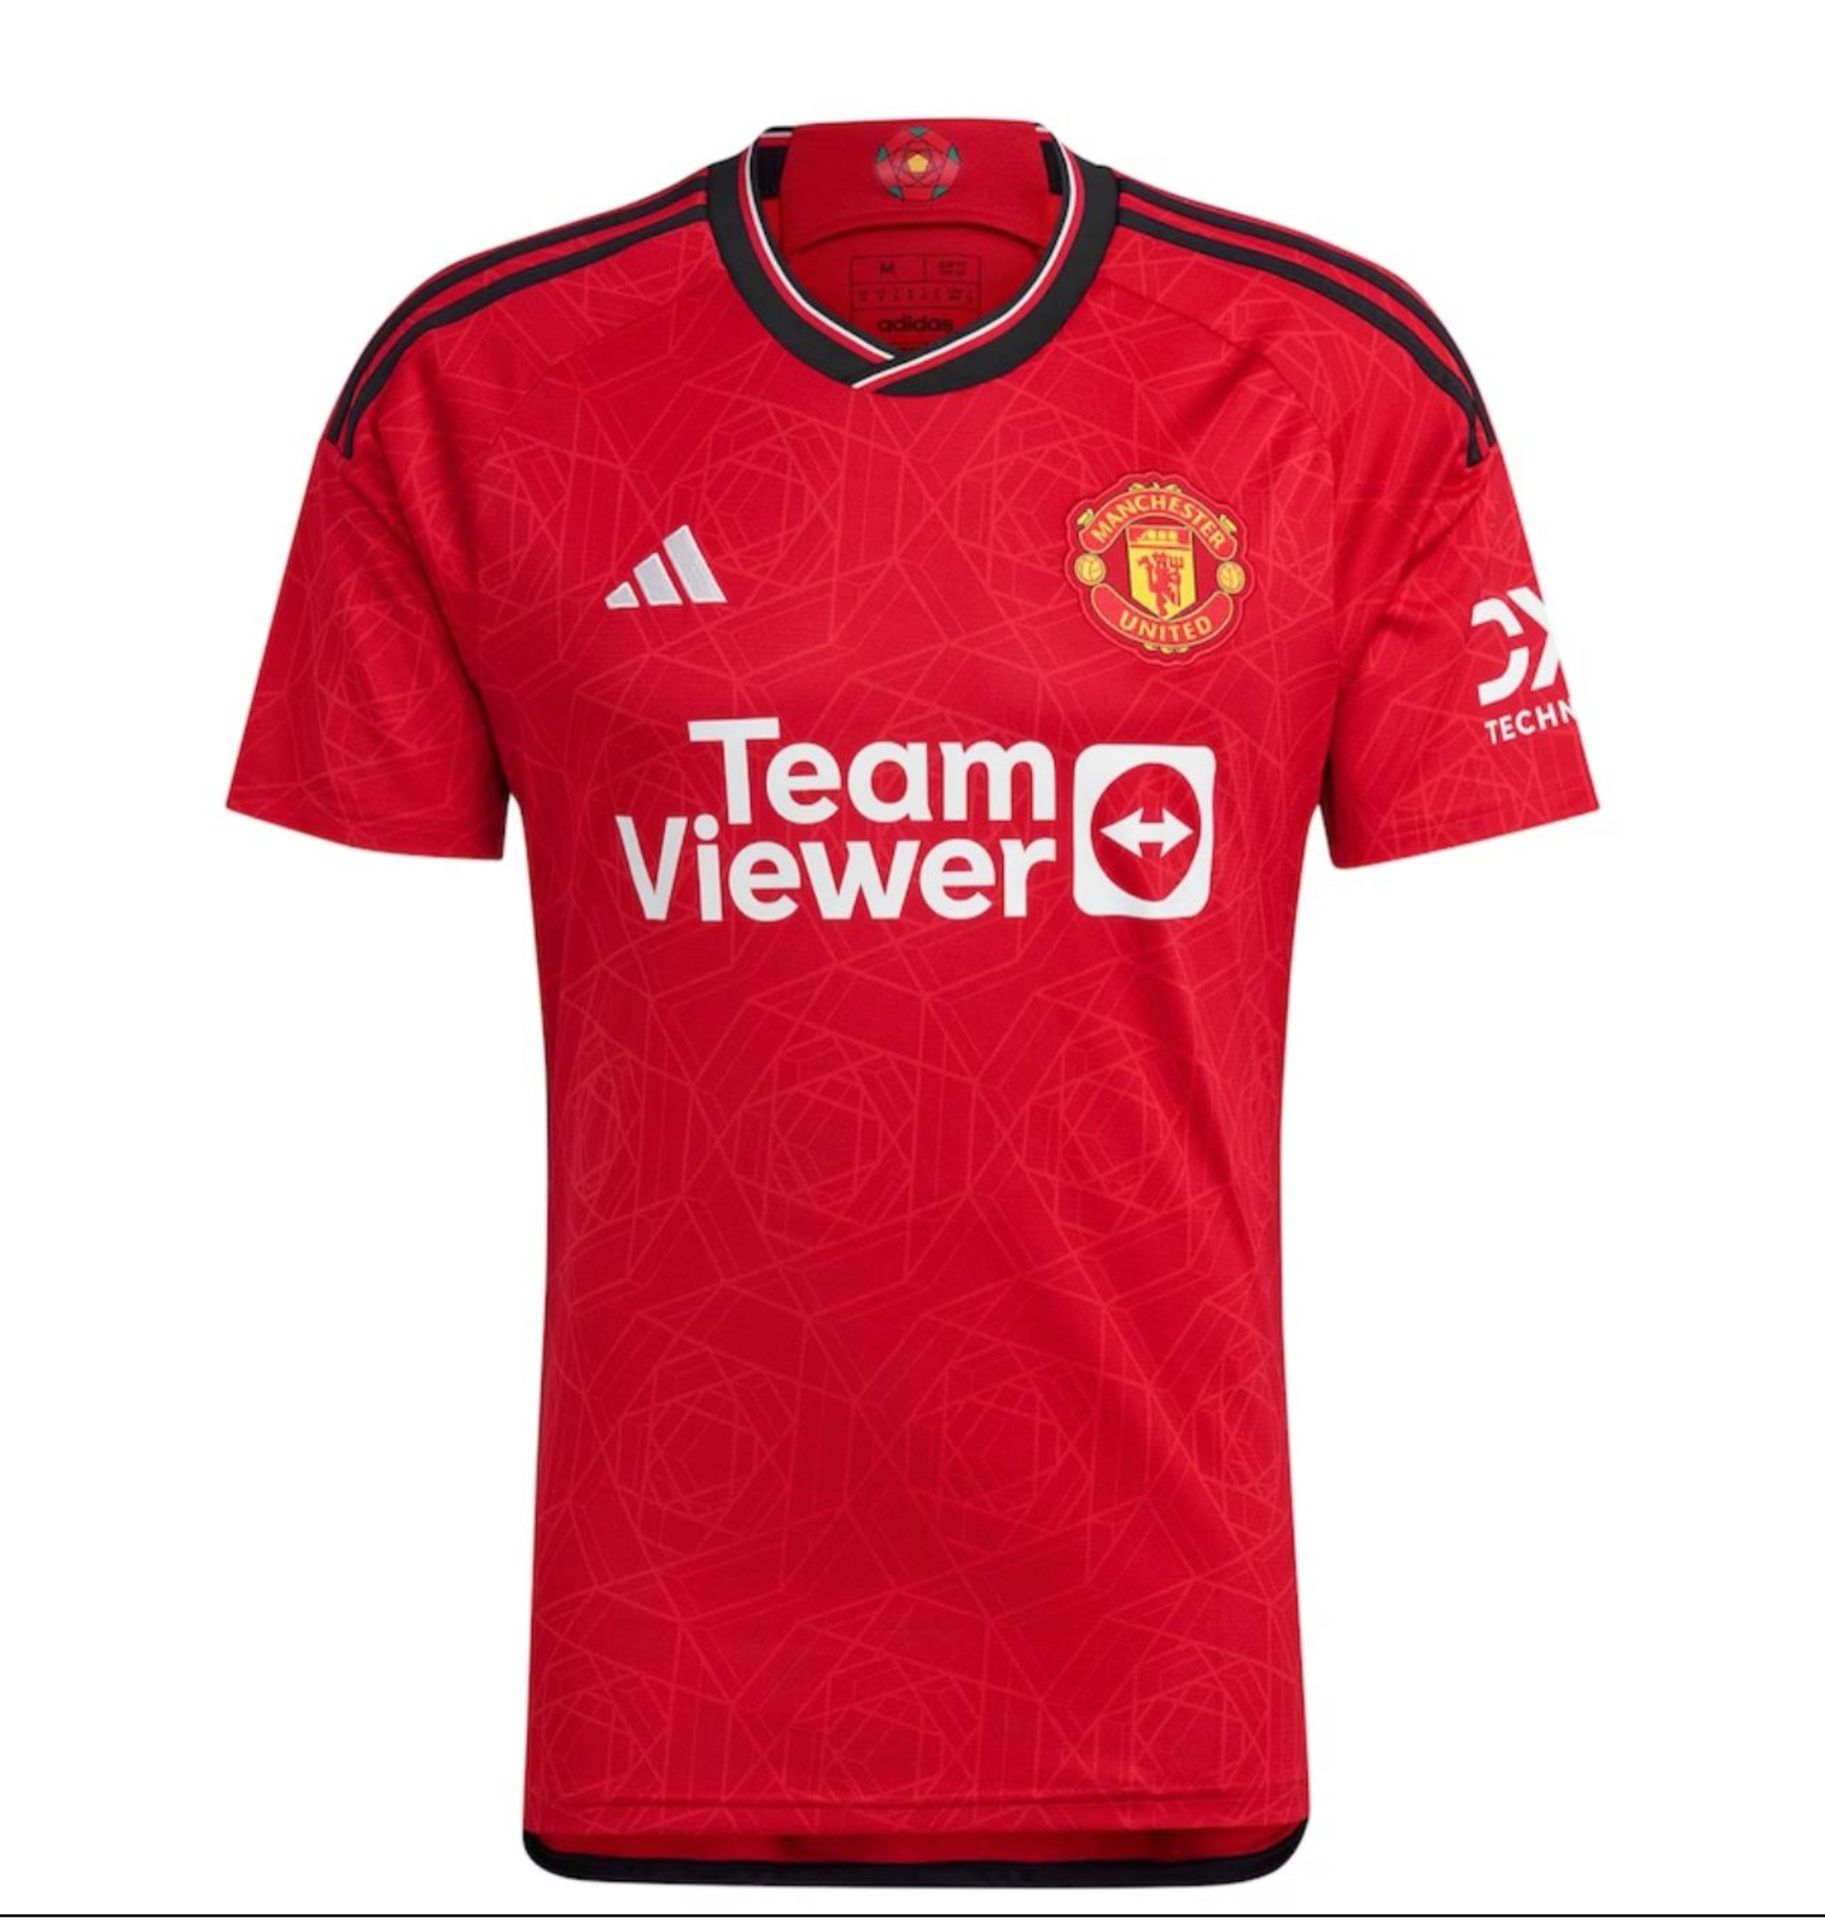 Mix man United Style 23/24 home, away, and third shirts